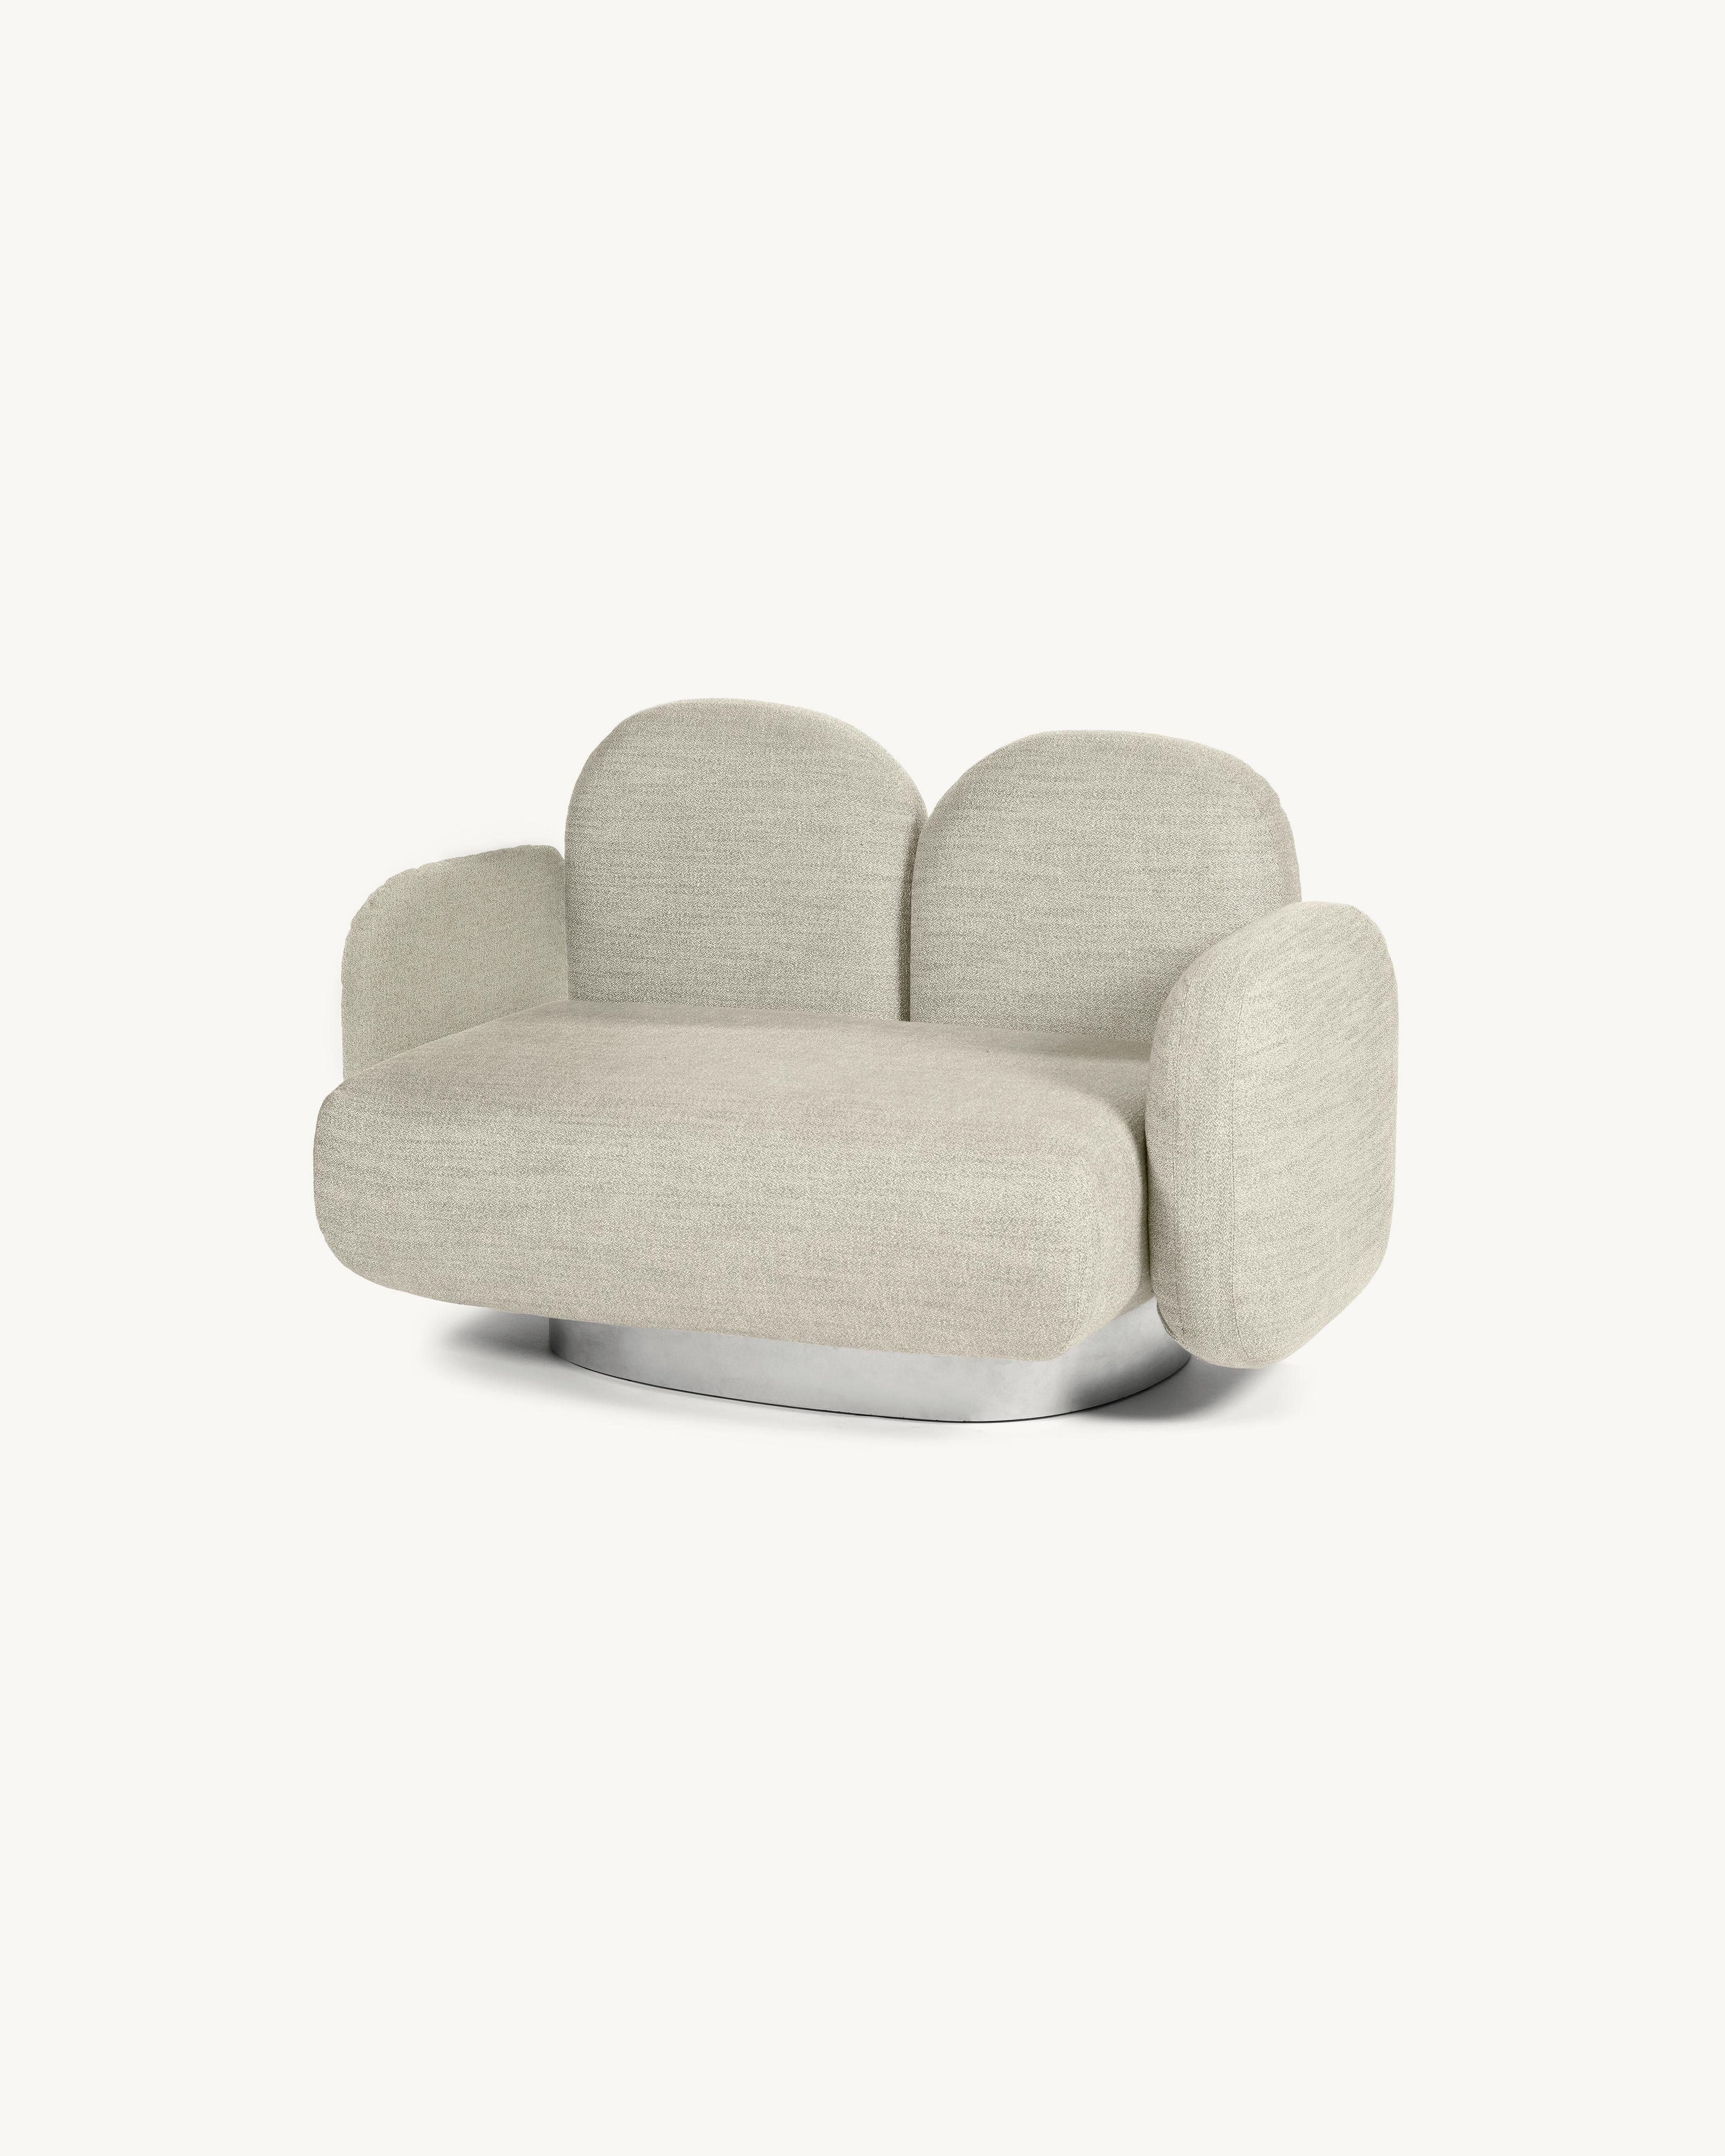 Contemporary Sofa 'Assemble' by Destroyers/Builders, 1 seater + 2 armrests For Sale 6